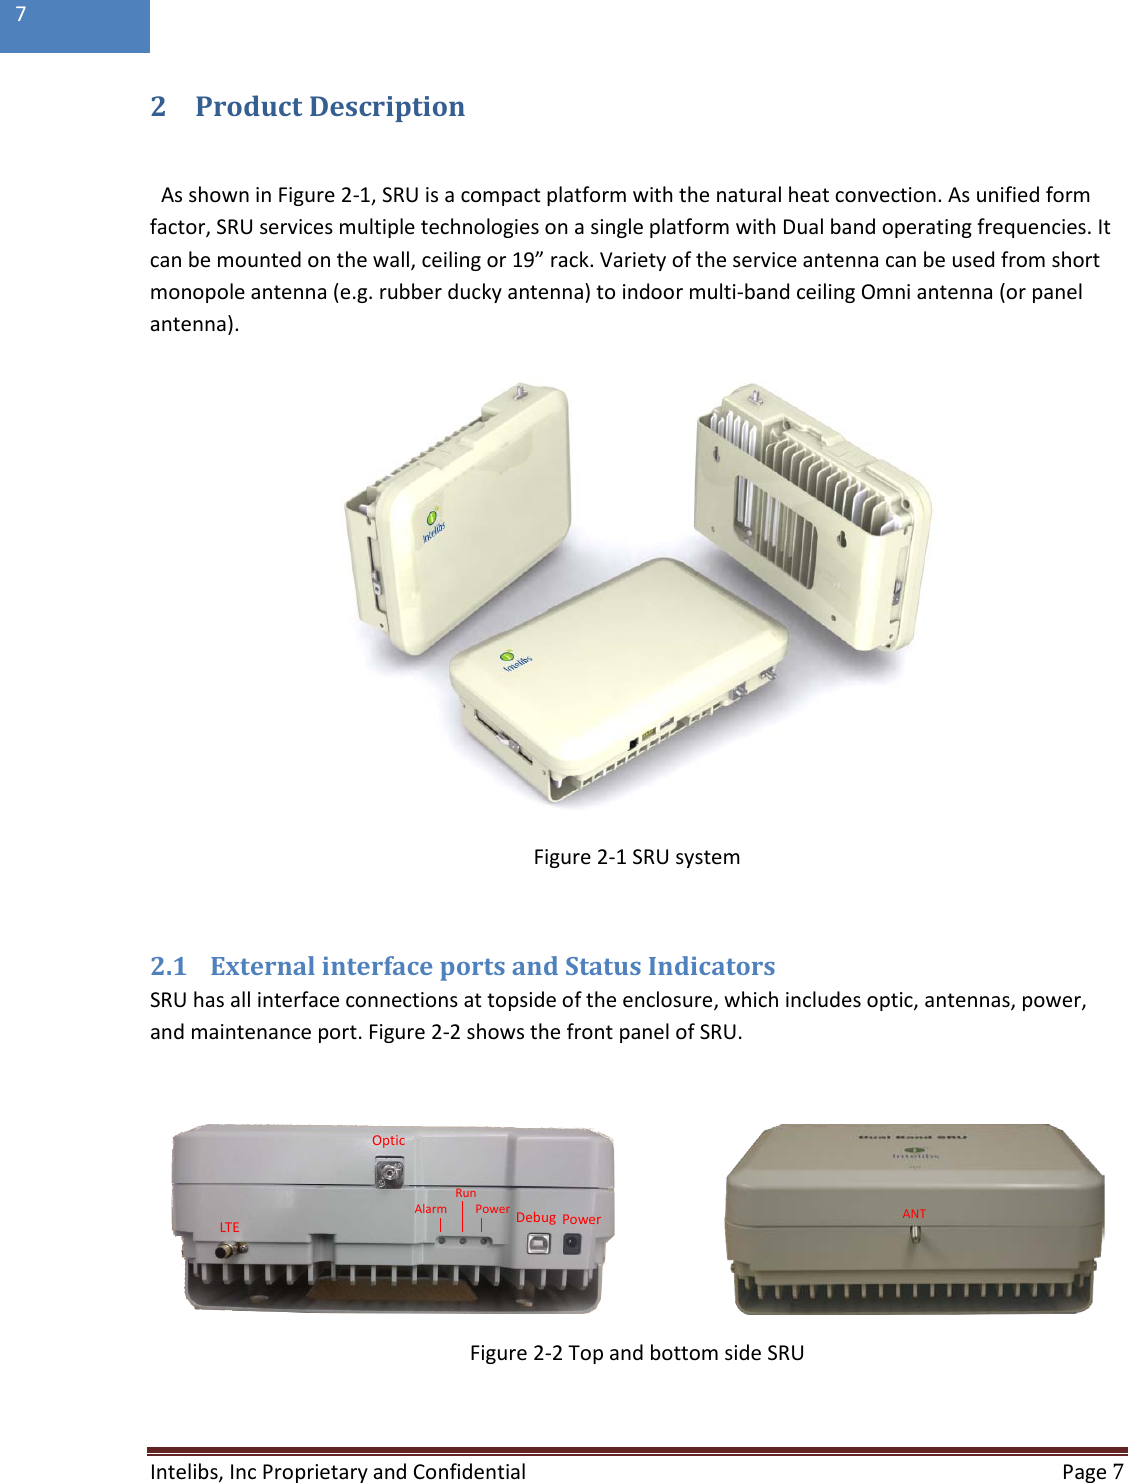  Intelibs, Inc Proprietary and Confidential  Page 7  7   2 Product Description  As shown in Figure 2-1, SRU is a compact platform with the natural heat convection. As unified form factor, SRU services multiple technologies on a single platform with Dual band operating frequencies. It can be mounted on the wall, ceiling or 19” rack. Variety of the service antenna can be used from short monopole antenna (e.g. rubber ducky antenna) to indoor multi-band ceiling Omni antenna (or panel antenna).   Figure 2-1 SRU system  2.1 External interface ports and Status Indicators SRU has all interface connections at topside of the enclosure, which includes optic, antennas, power, and maintenance port. Figure 2-2 shows the front panel of SRU.                         Figure 2-2 Top and bottom side SRU  PowerDebugPowerRunAlarmOpticLTEANT